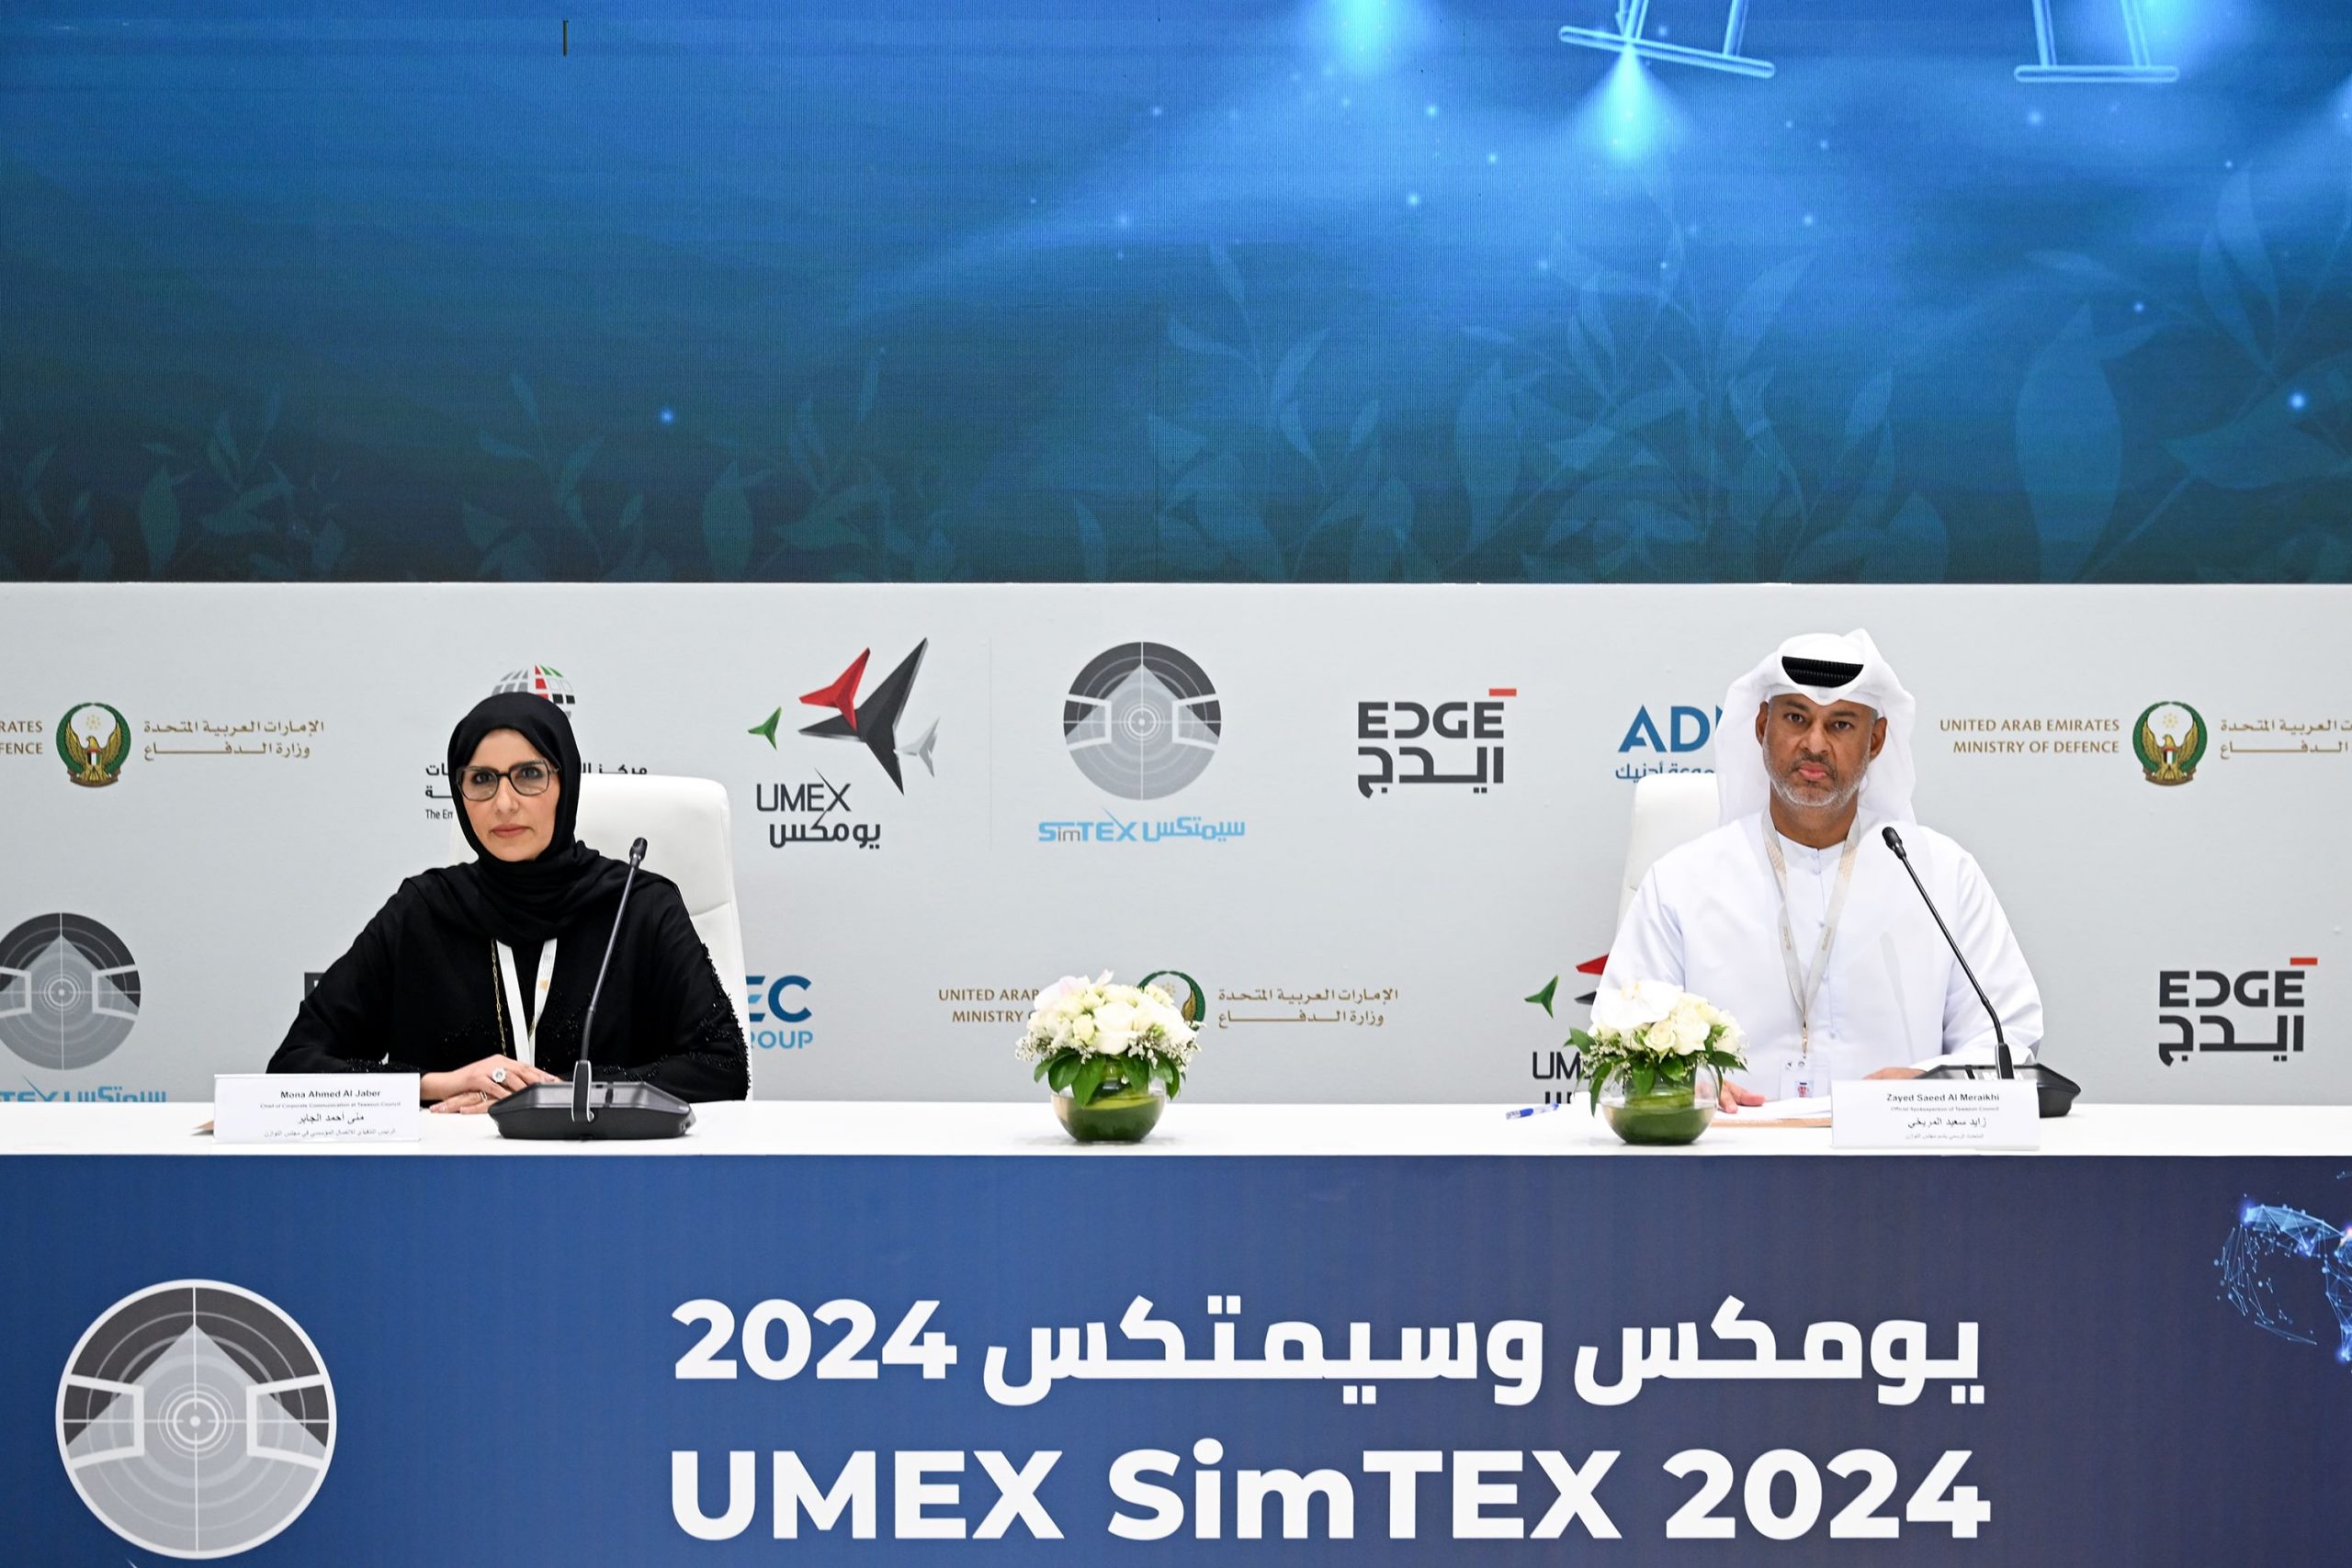 MoD deals for first and second days of UMEX and SimTEX 2024 exceed AED1.9 billion